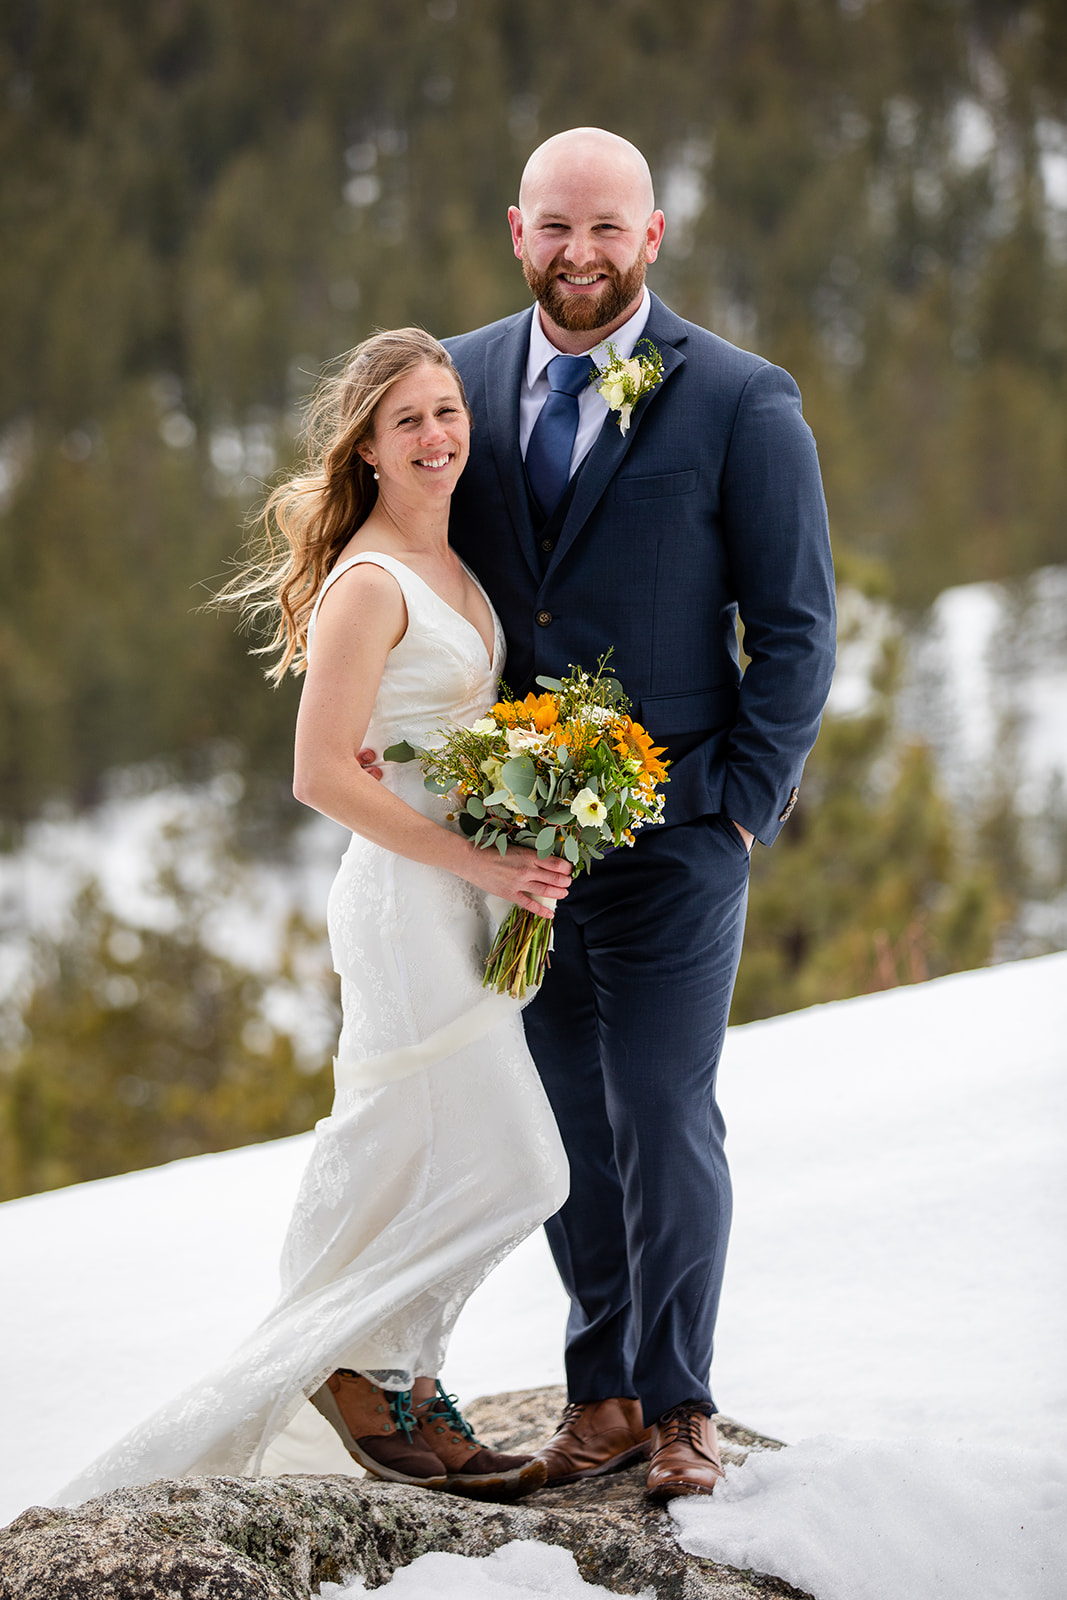 Wedding couple standing together with pine trees in the background